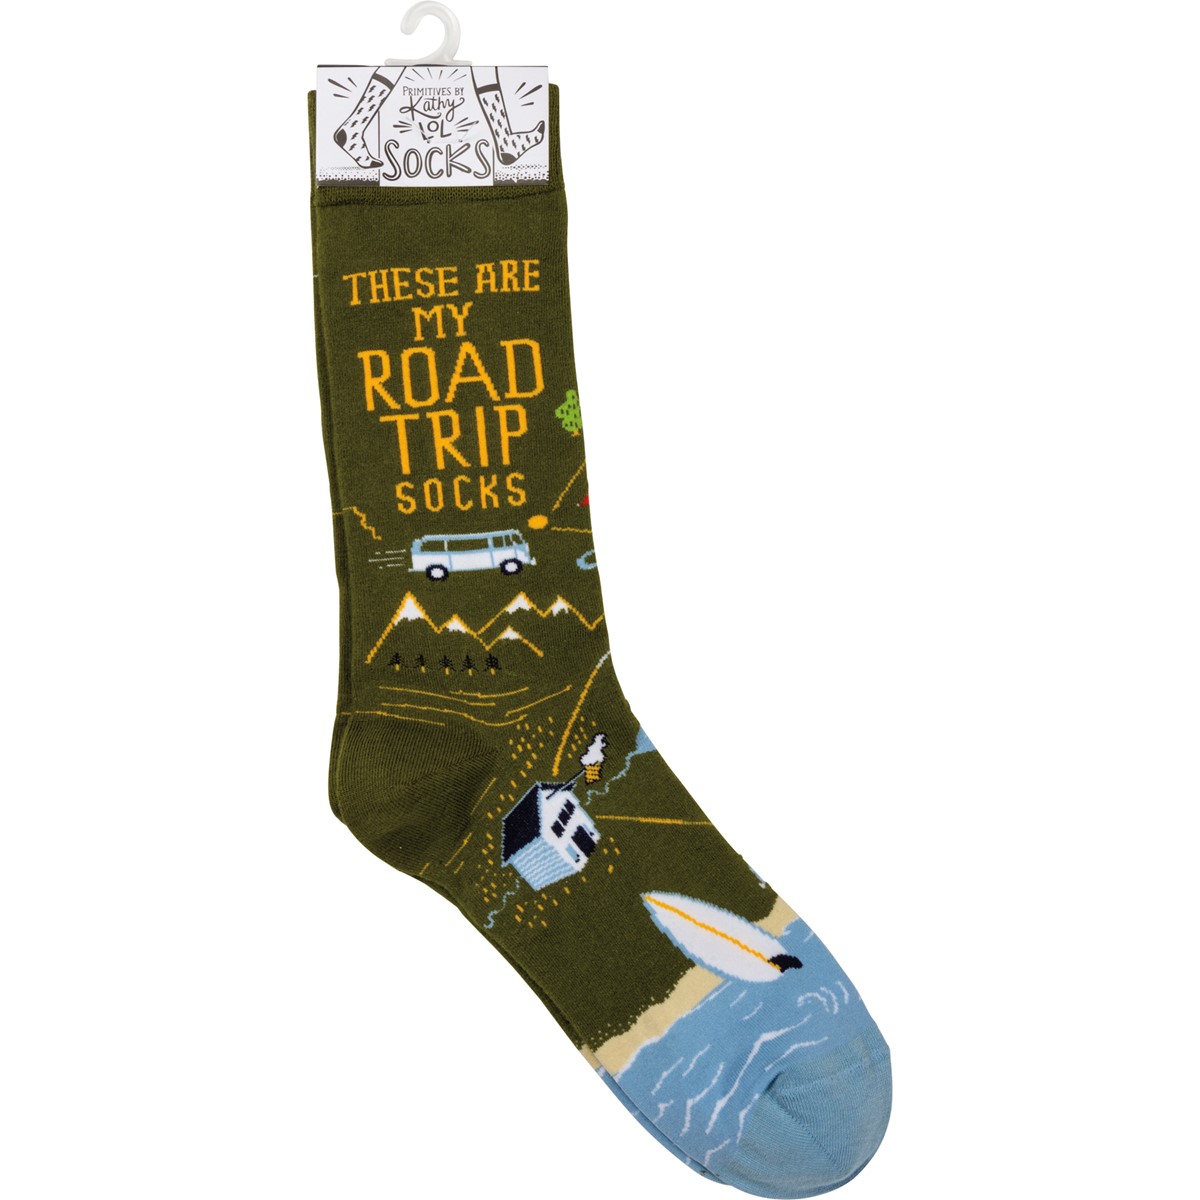 Socks - These Are My Road Trip Socks - One Size Fits Most - Cotton, Nylon, Spandex